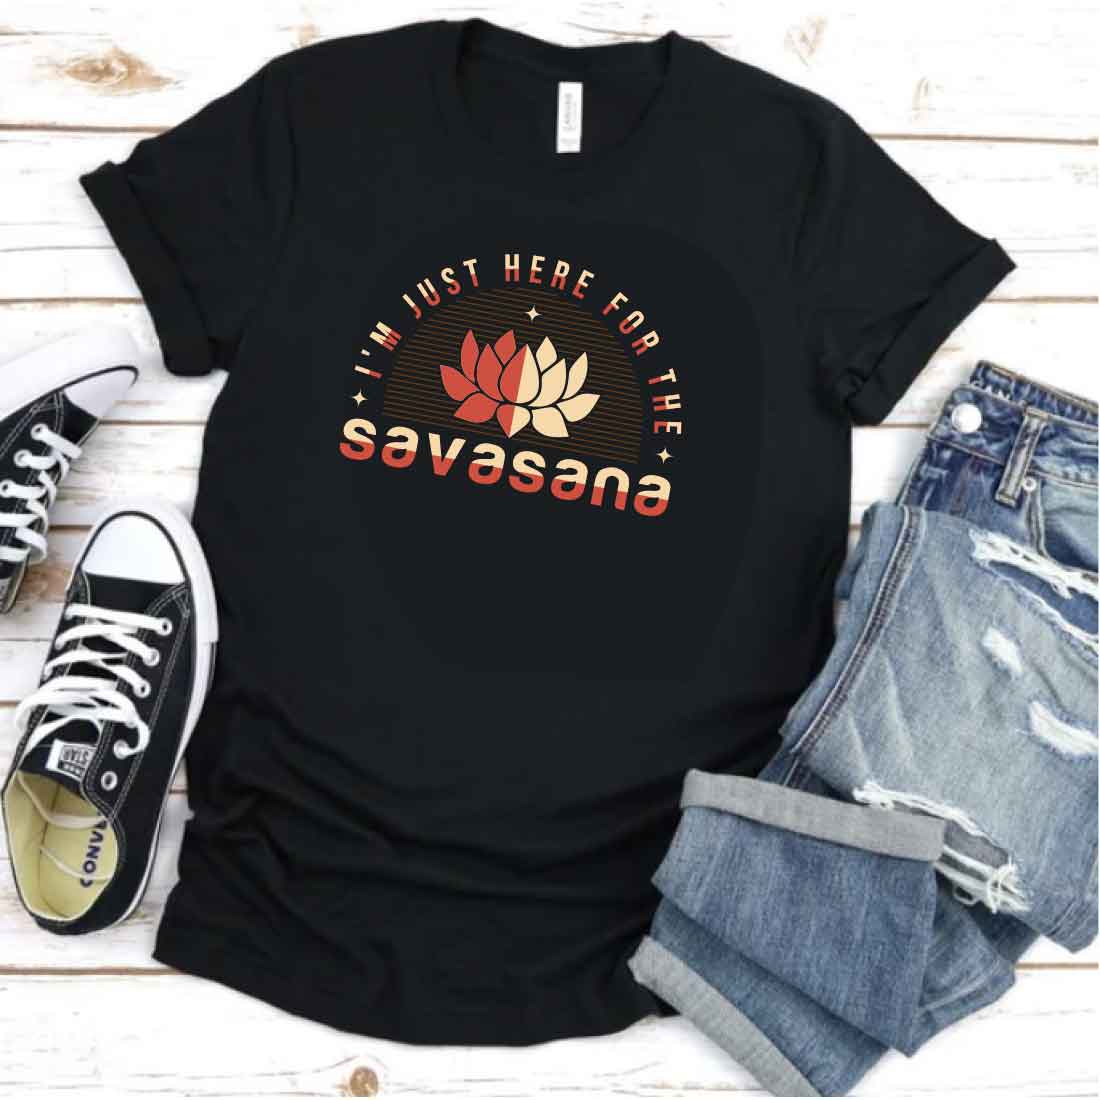 I am just here for the Savasana, an awesome t-shirt design preview image.